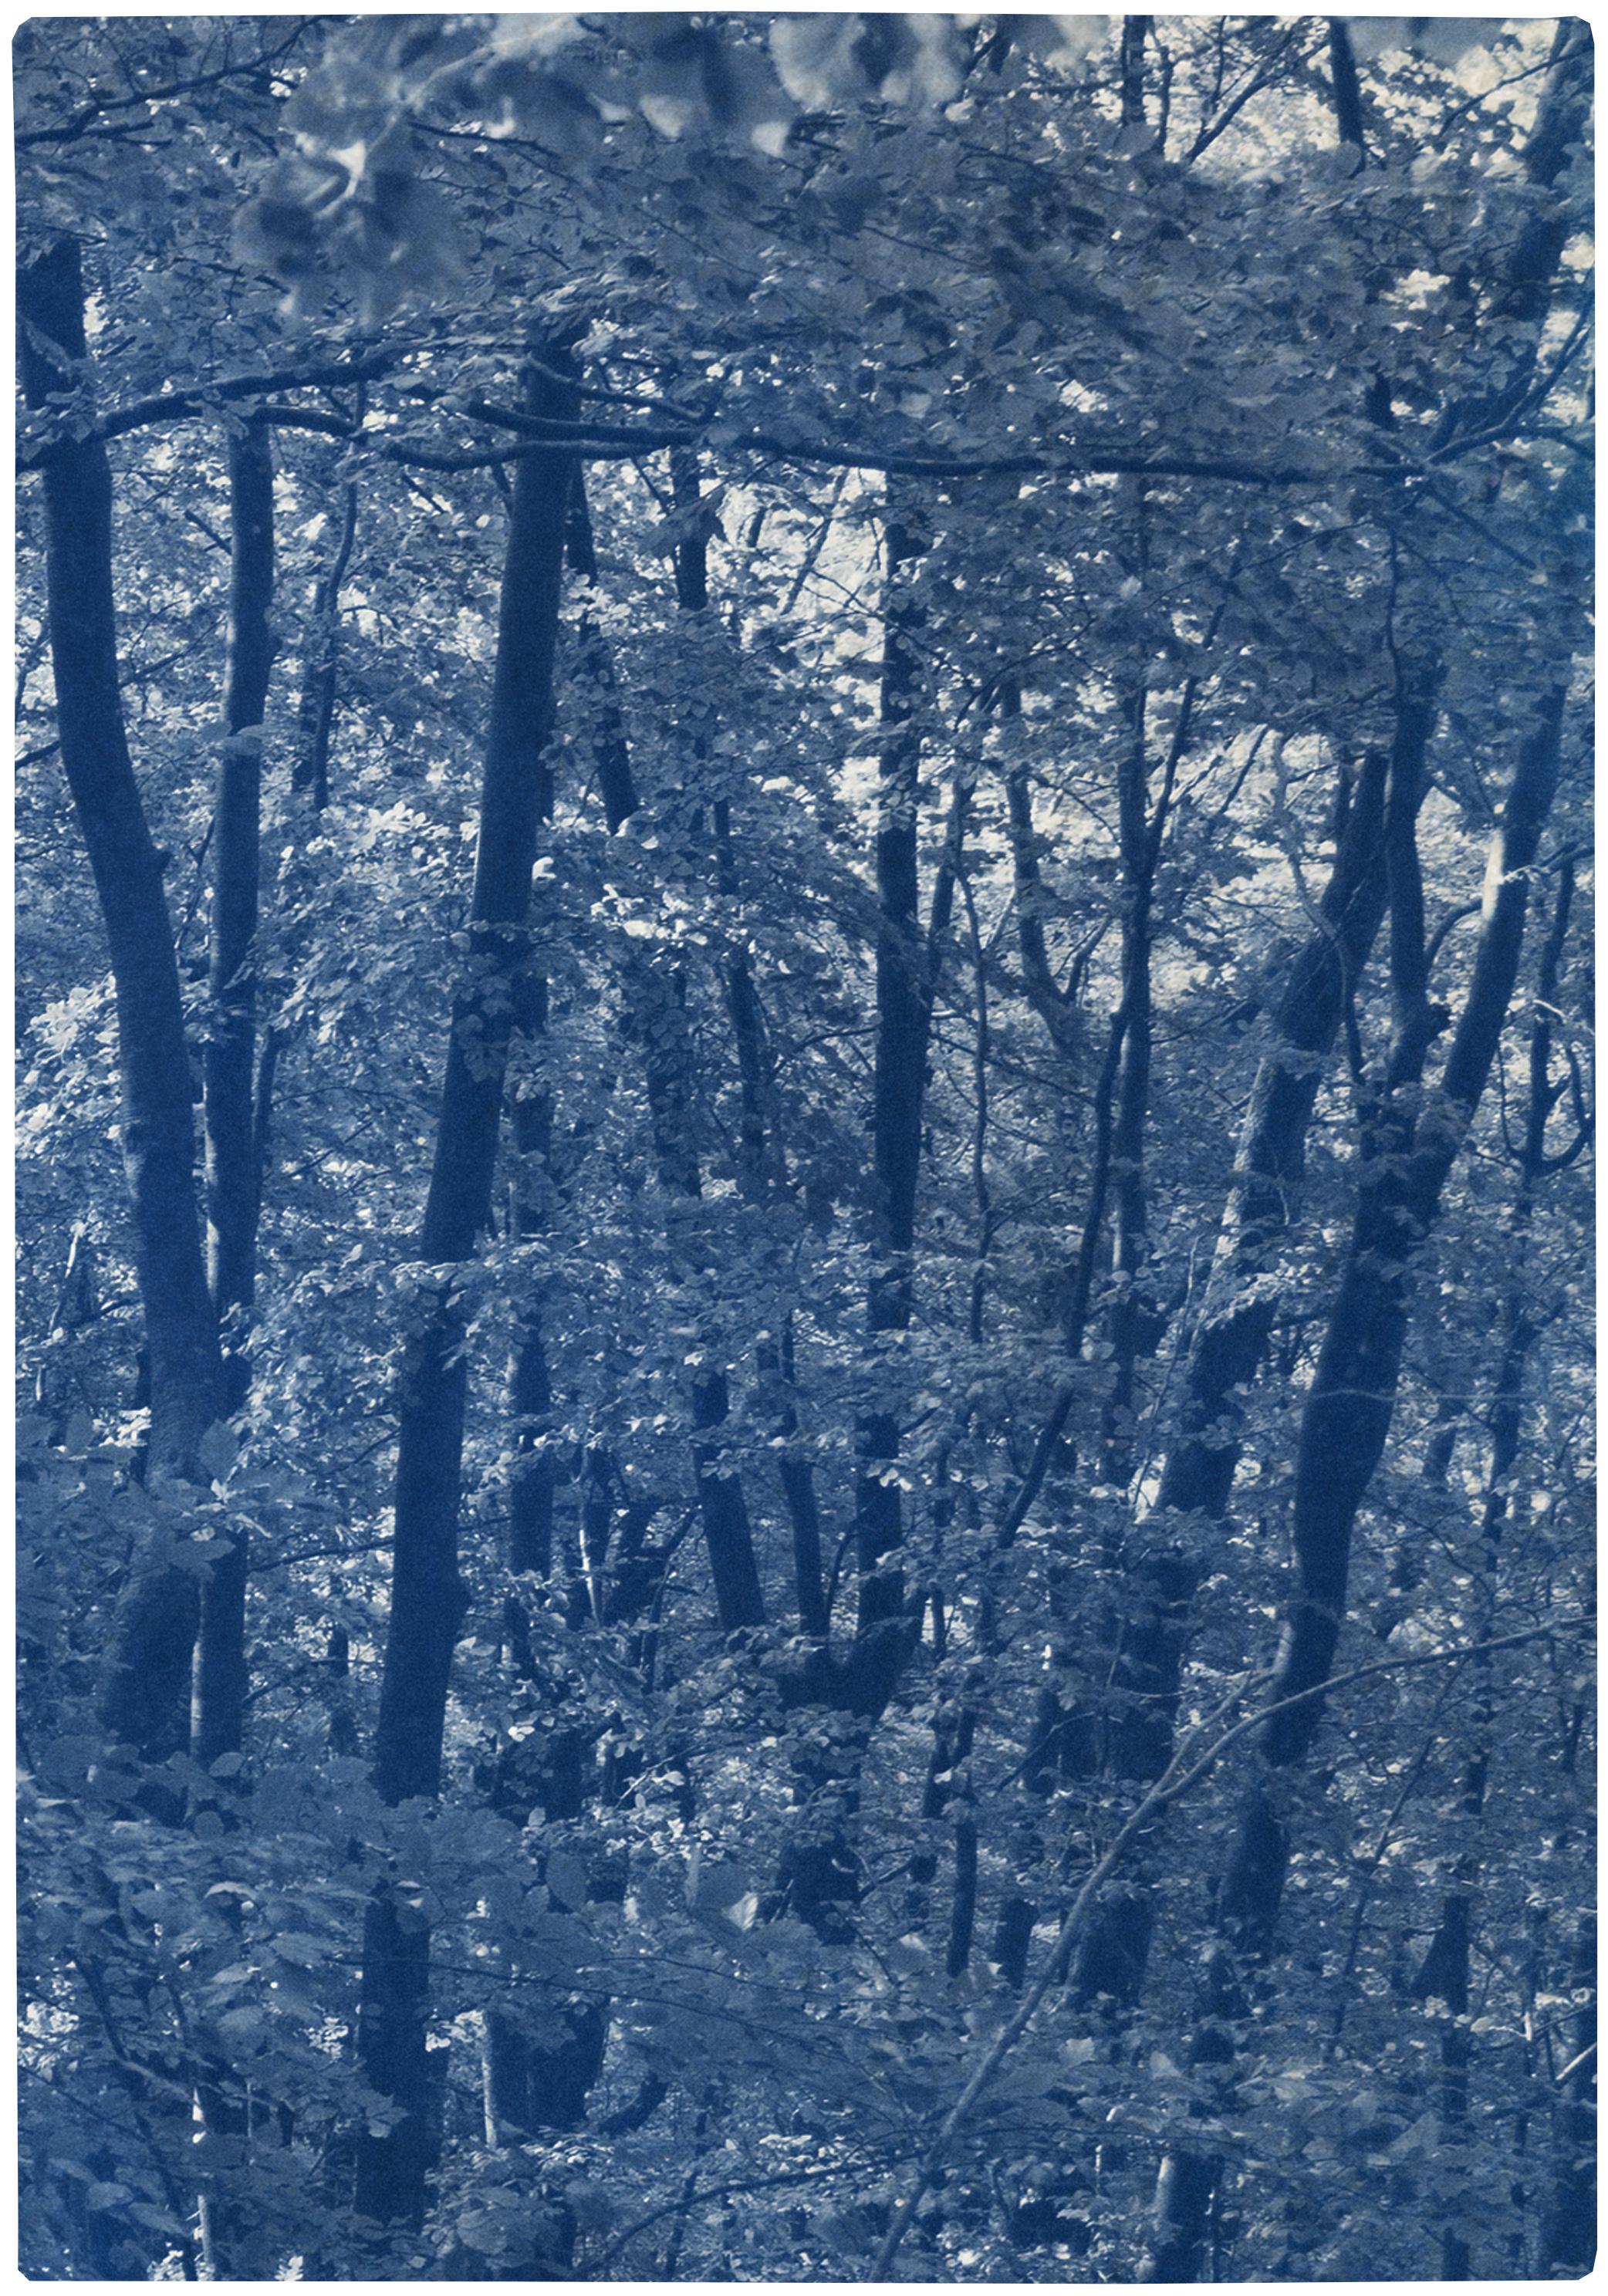 Walking in the Woods, Forest Landscape Cyanotype Print, Limited Edition, Blue - Realist Painting by Kind of Cyan